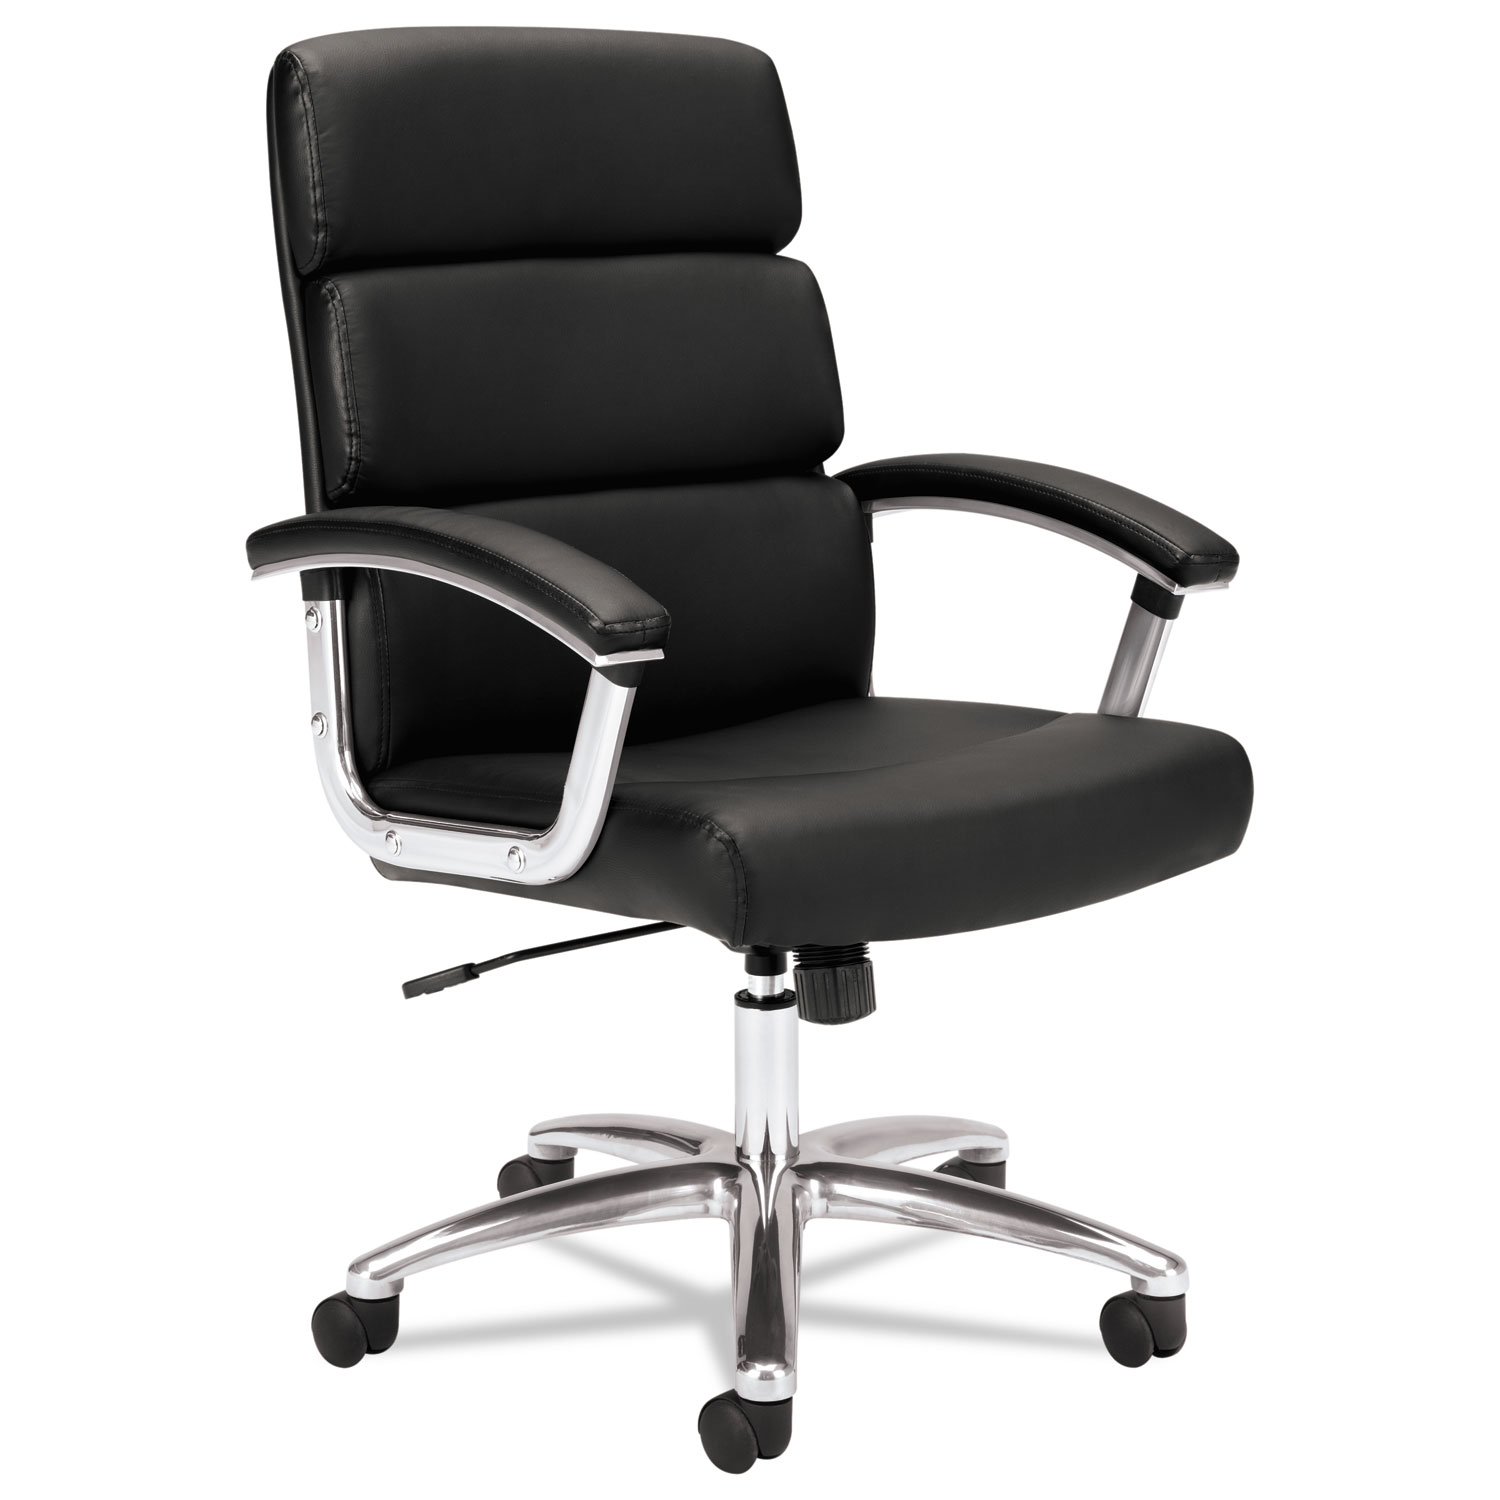  HON HVL103.SB11 Traction High-Back Executive Chair, Supports up to 250 lbs., Black Seat/Black Back, Polished Aluminum Base (BSXVL103SB11) 